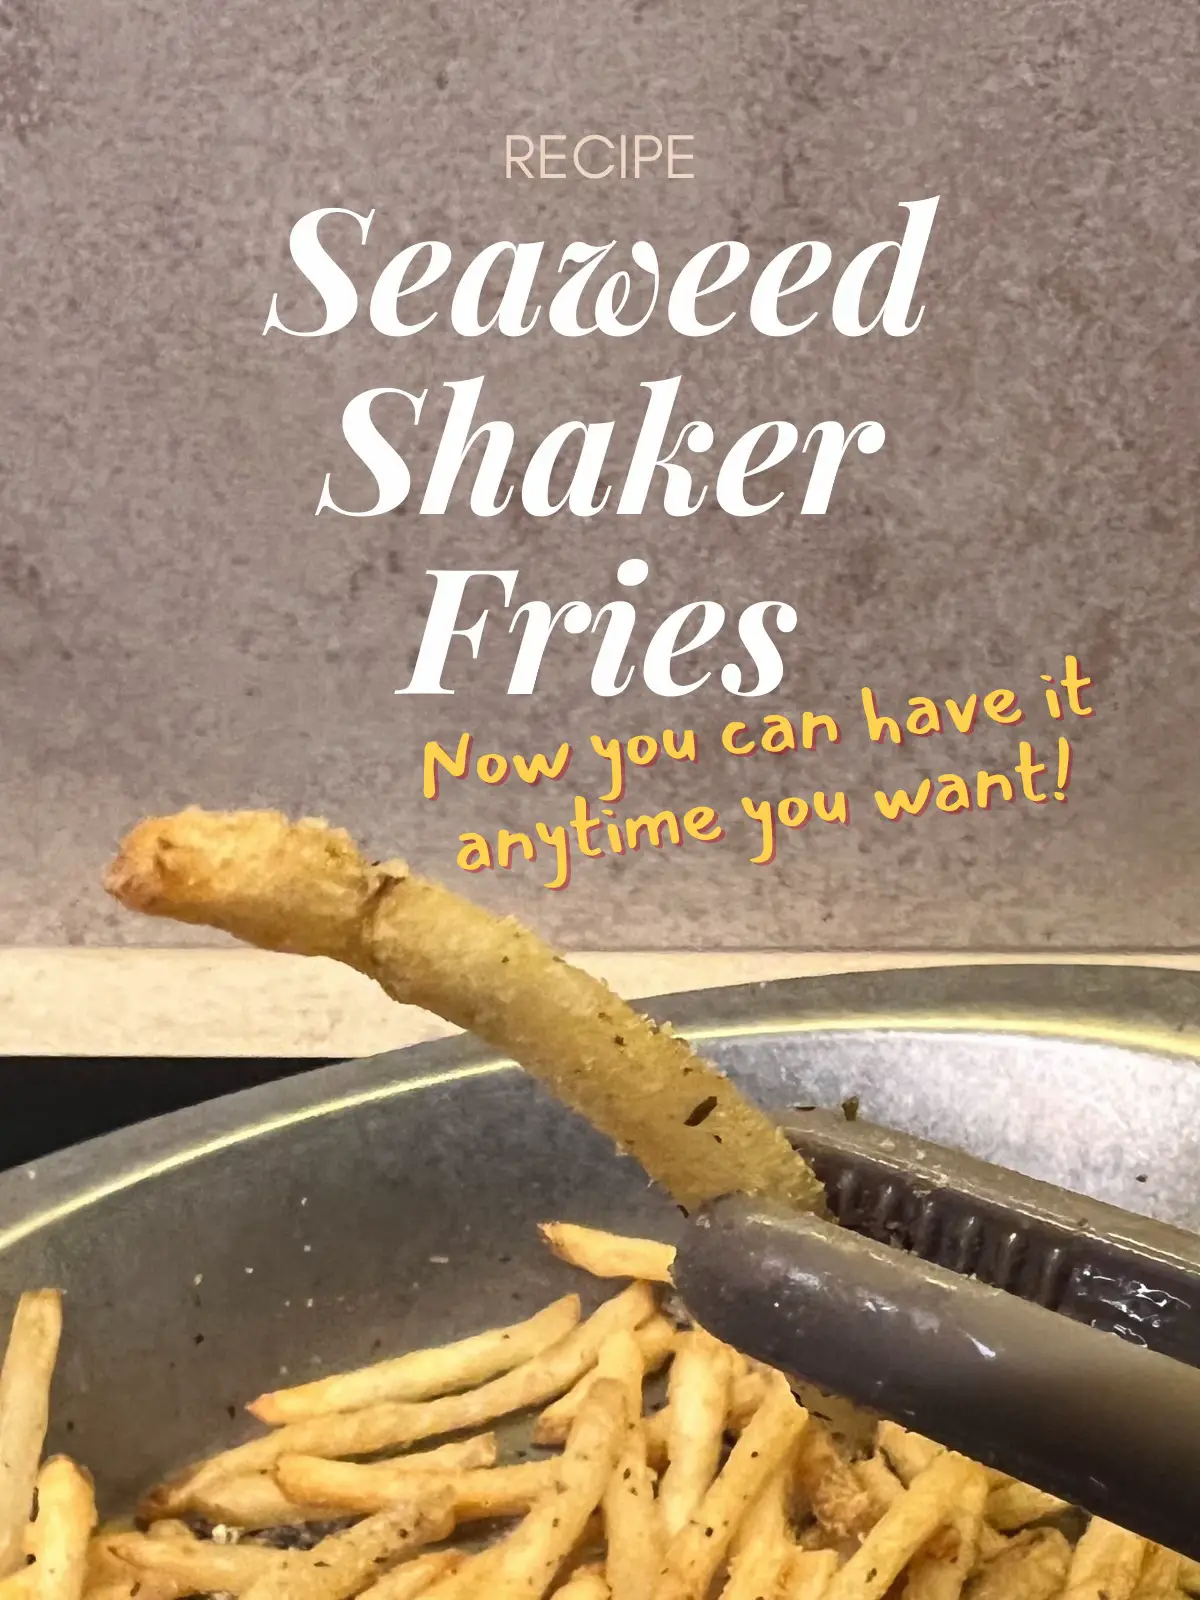 Seaweed shaker fries ANYTIME YOU WANT!'s images(0)